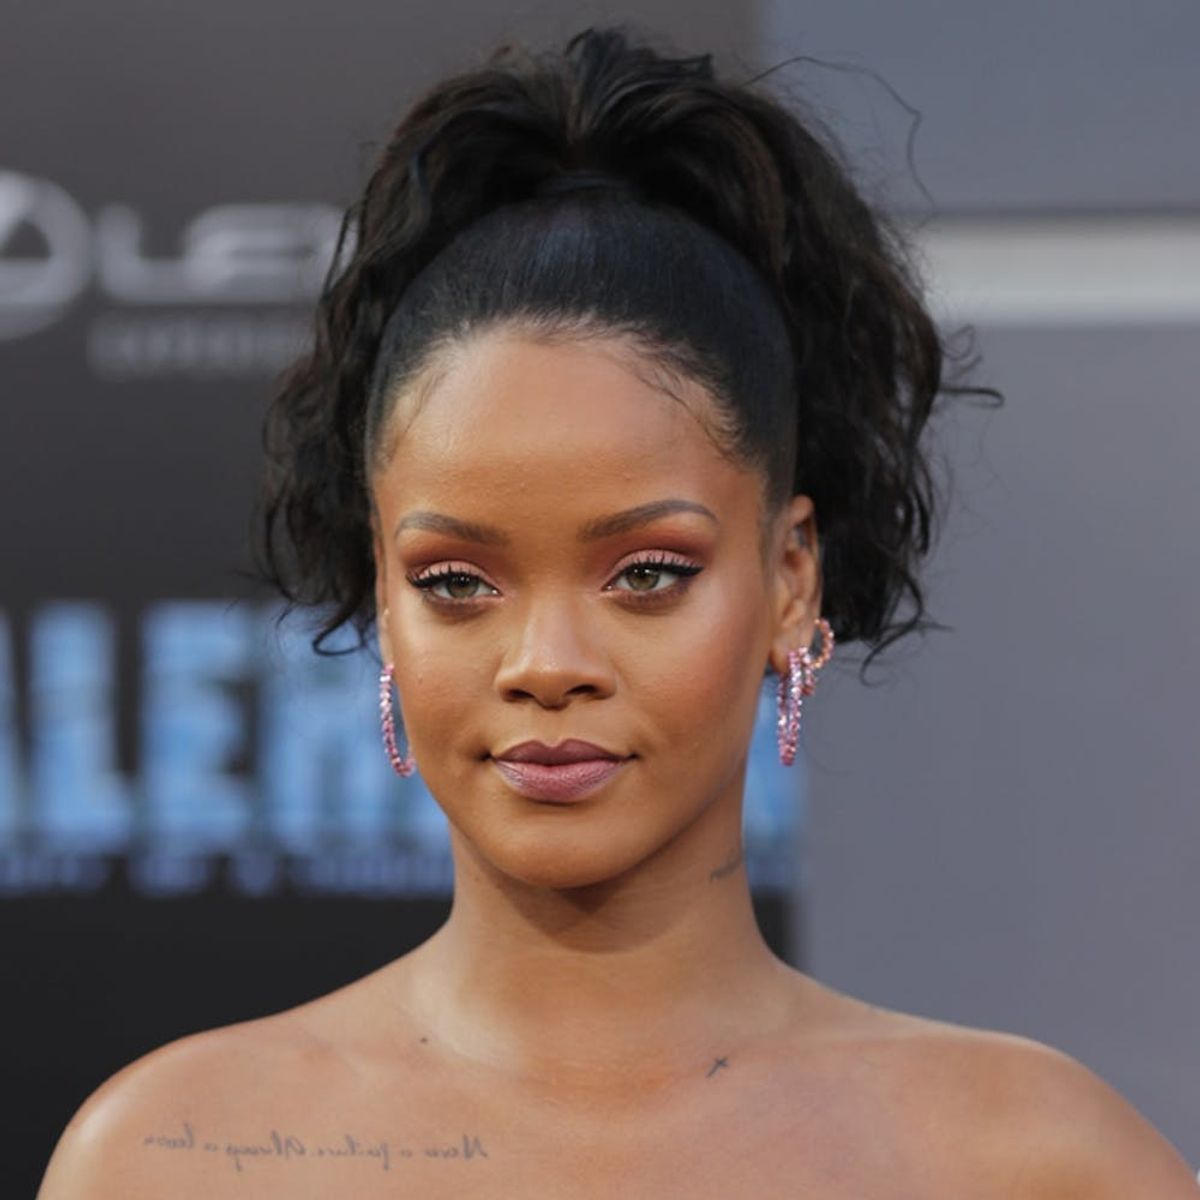 The Best Twitter Reactions to Rihanna’s Over-the-Top Valerian Premiere Gown